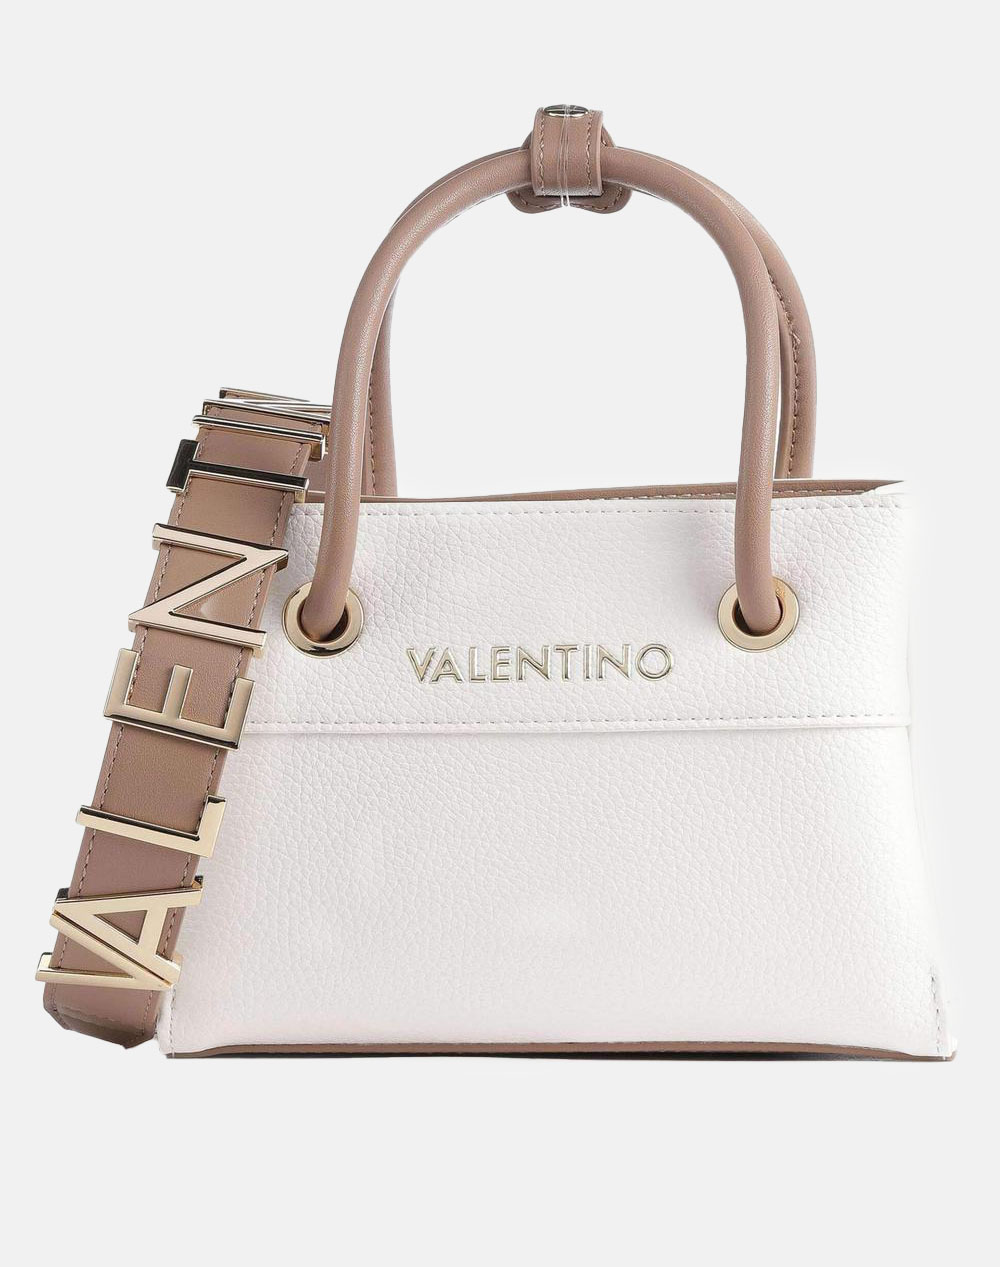 VALENTINO BAGS ΤΣΑΝΤΕΣ ΧΕΙΡΟΣ S61680169970-970 OffWhite